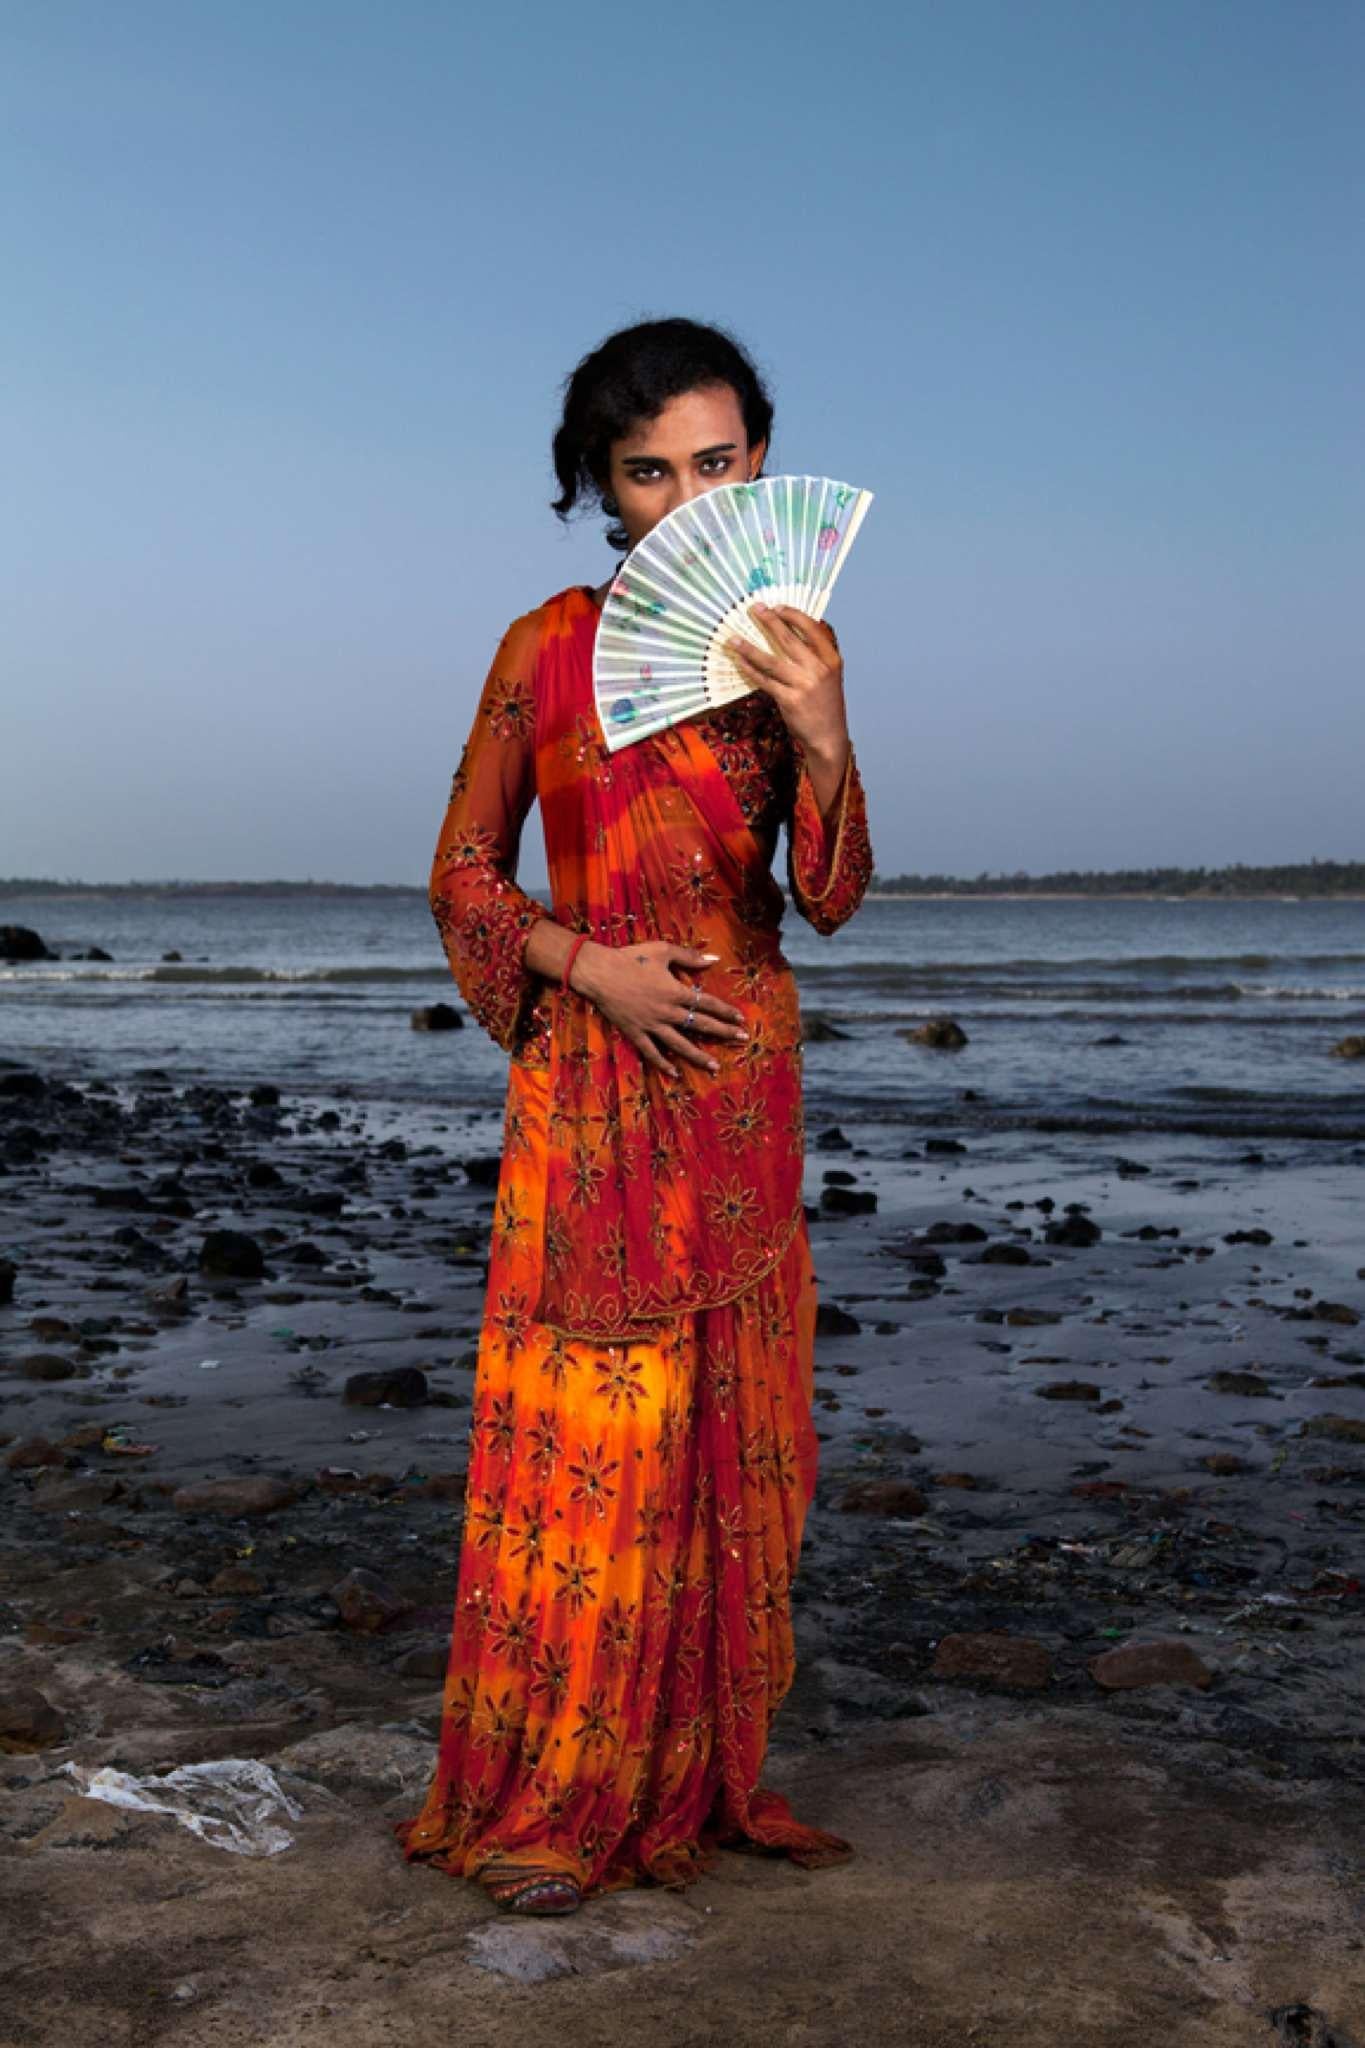 Vijay and Julie, Protrait. From The Series The Third Gender of India - Photograph by Jill Peters